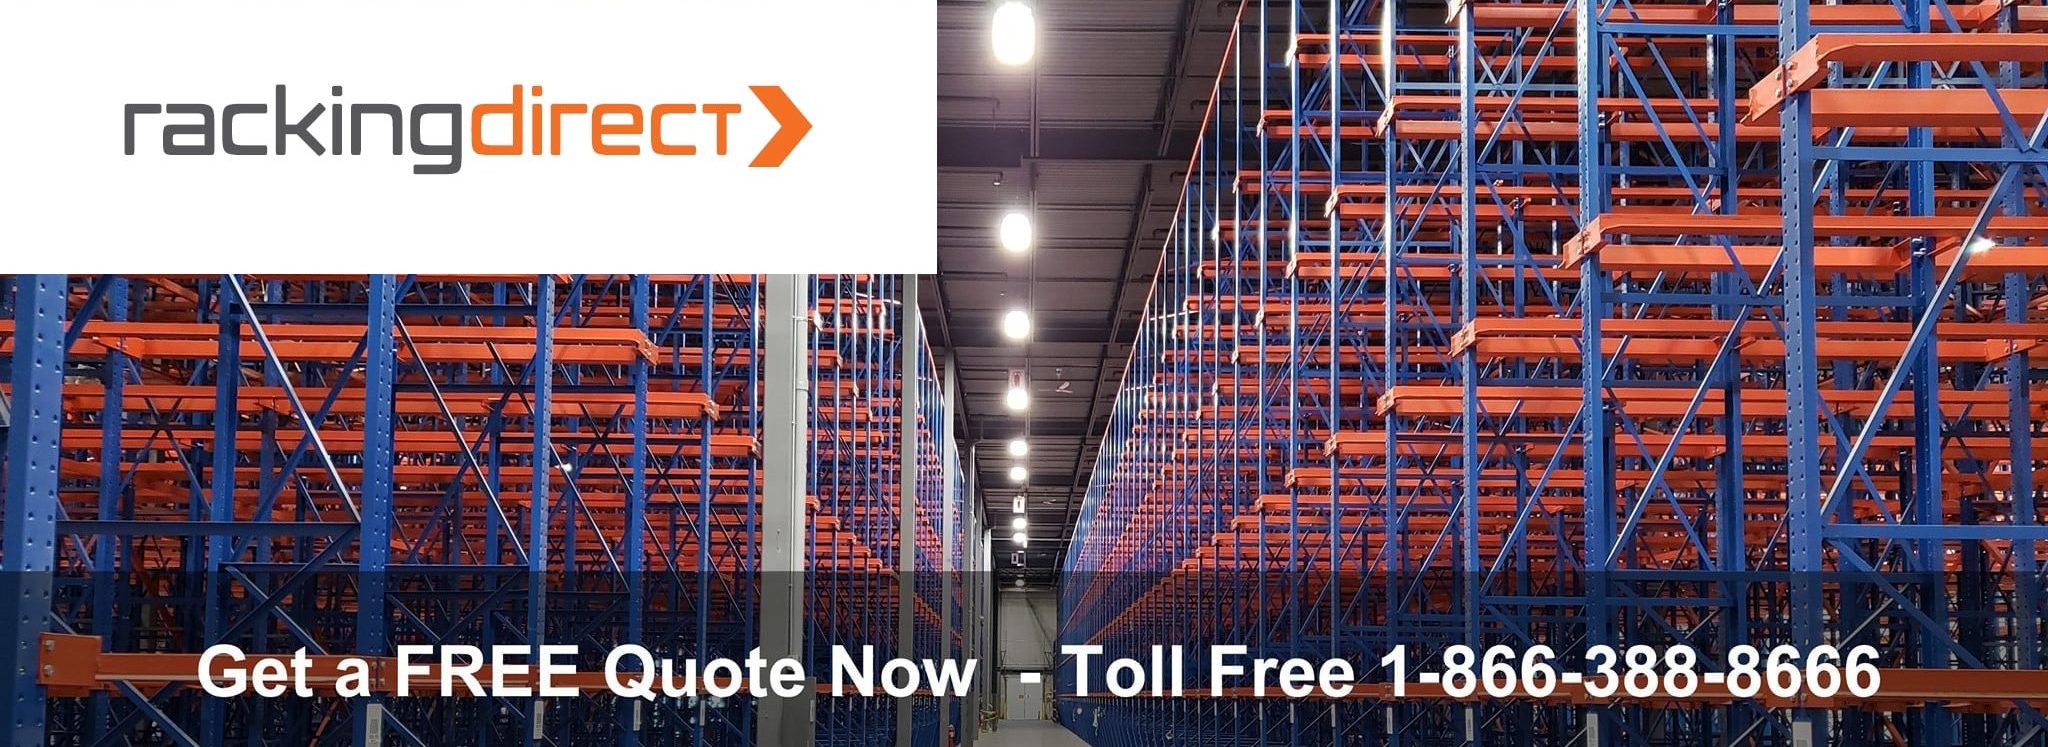 Racking DIRECT Selective Racking Systems